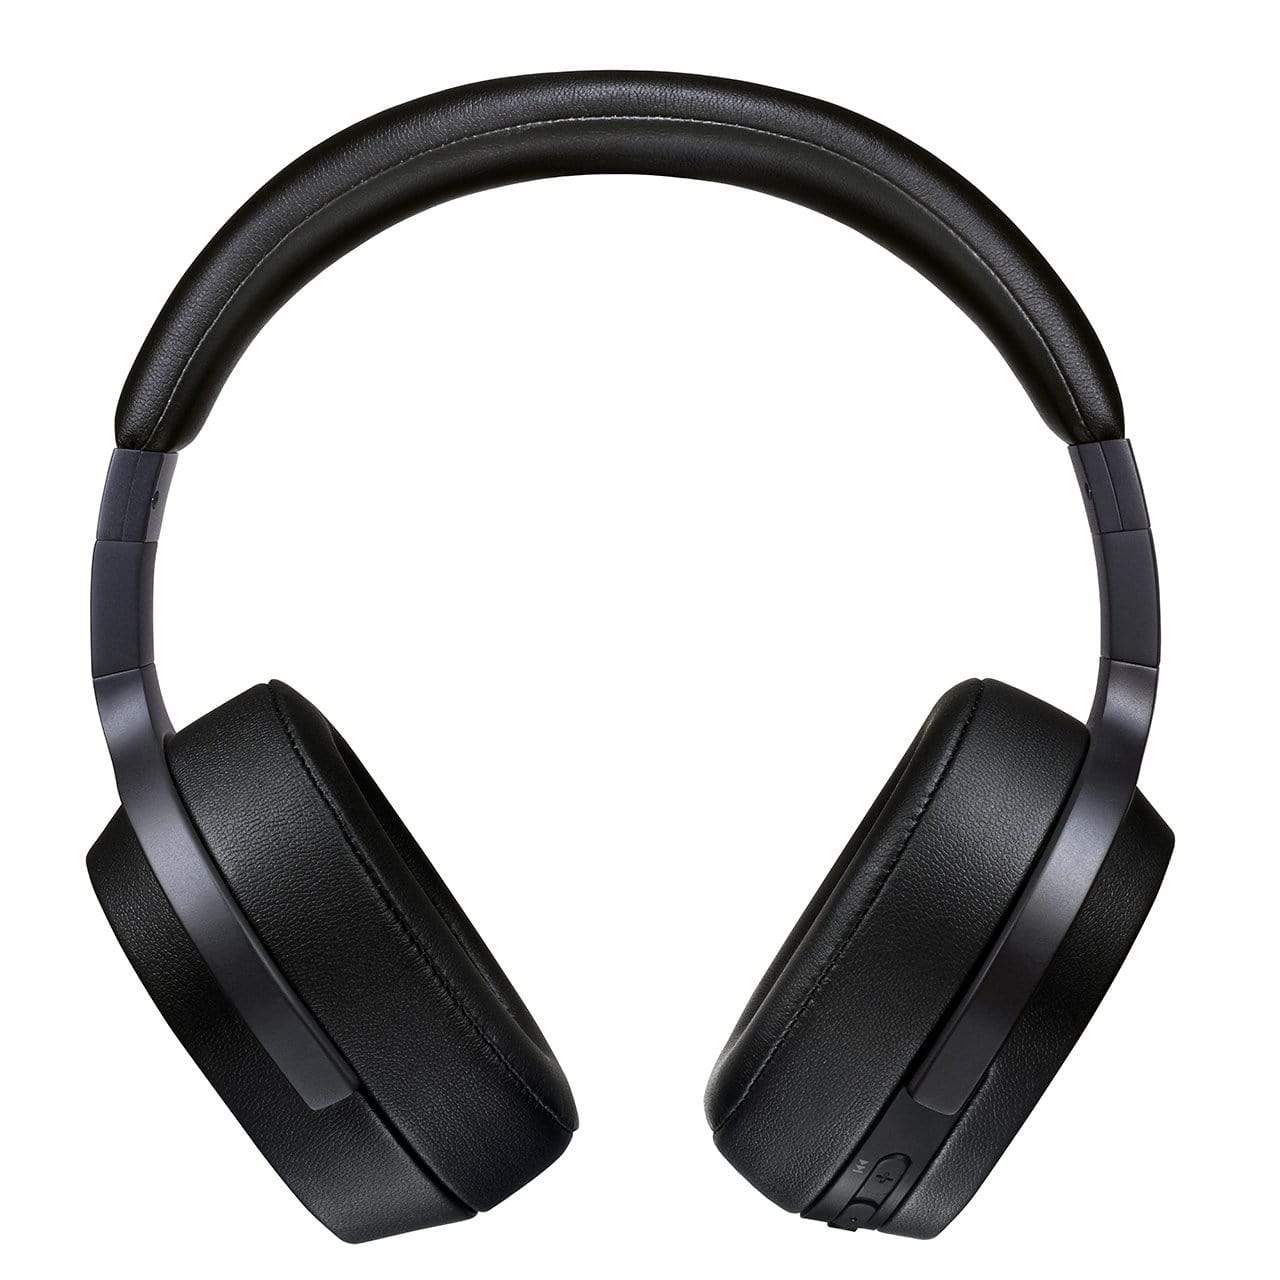 SpaceOne WirelOver-Ear blk - Jashanmal Home